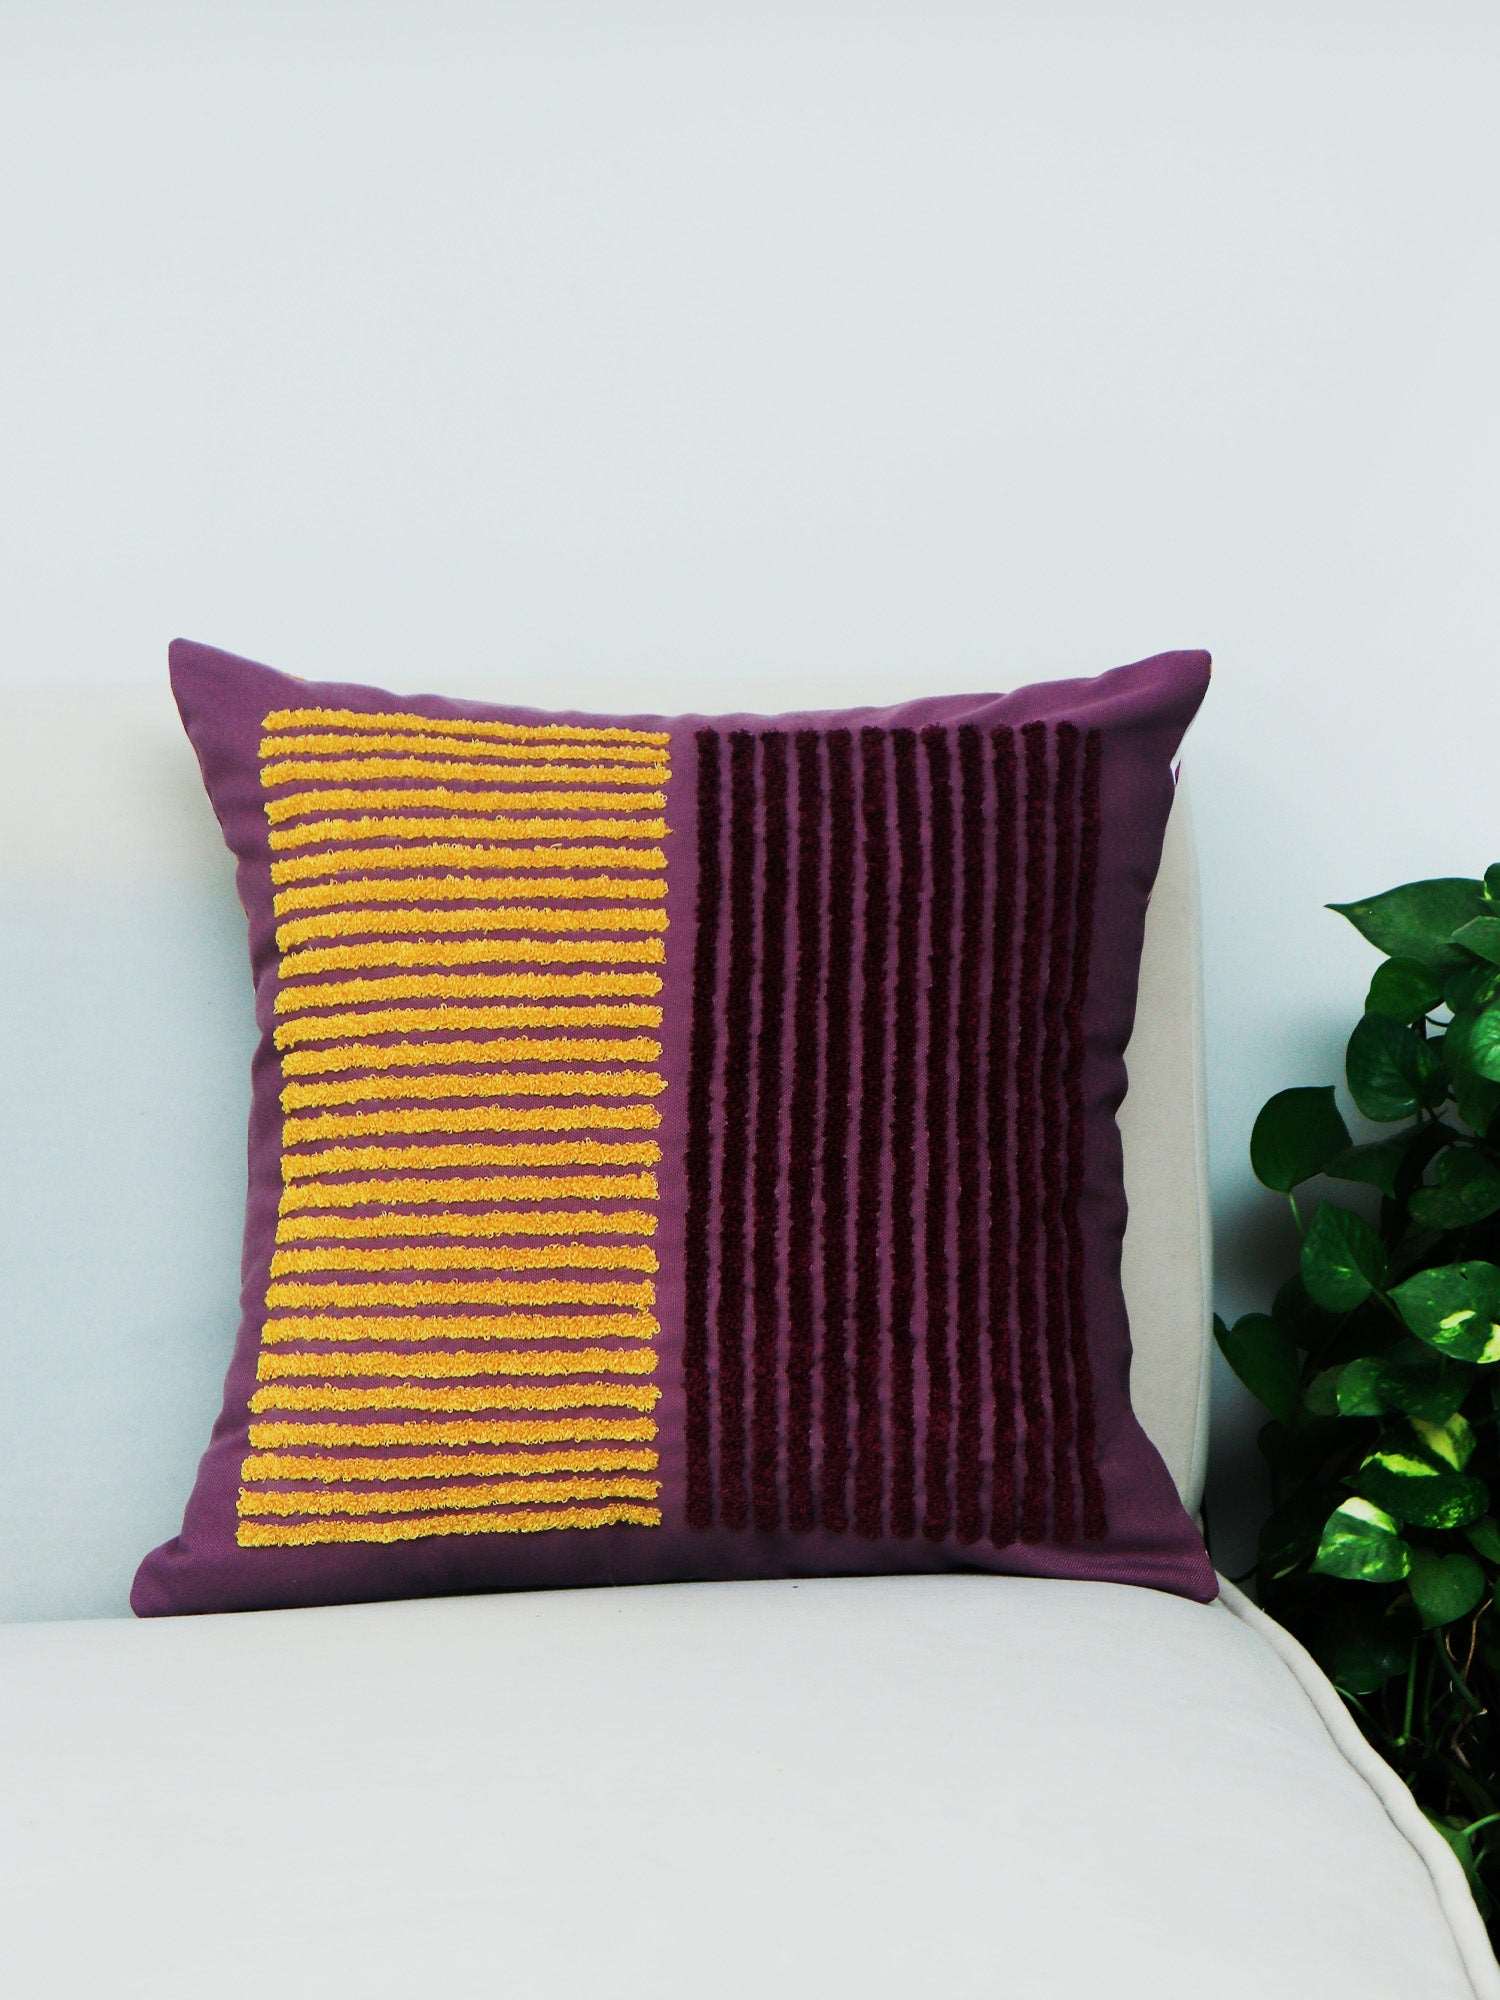 Cushion Cover Cotton Blend Digital print With Embroidered Purple - 16"X16"